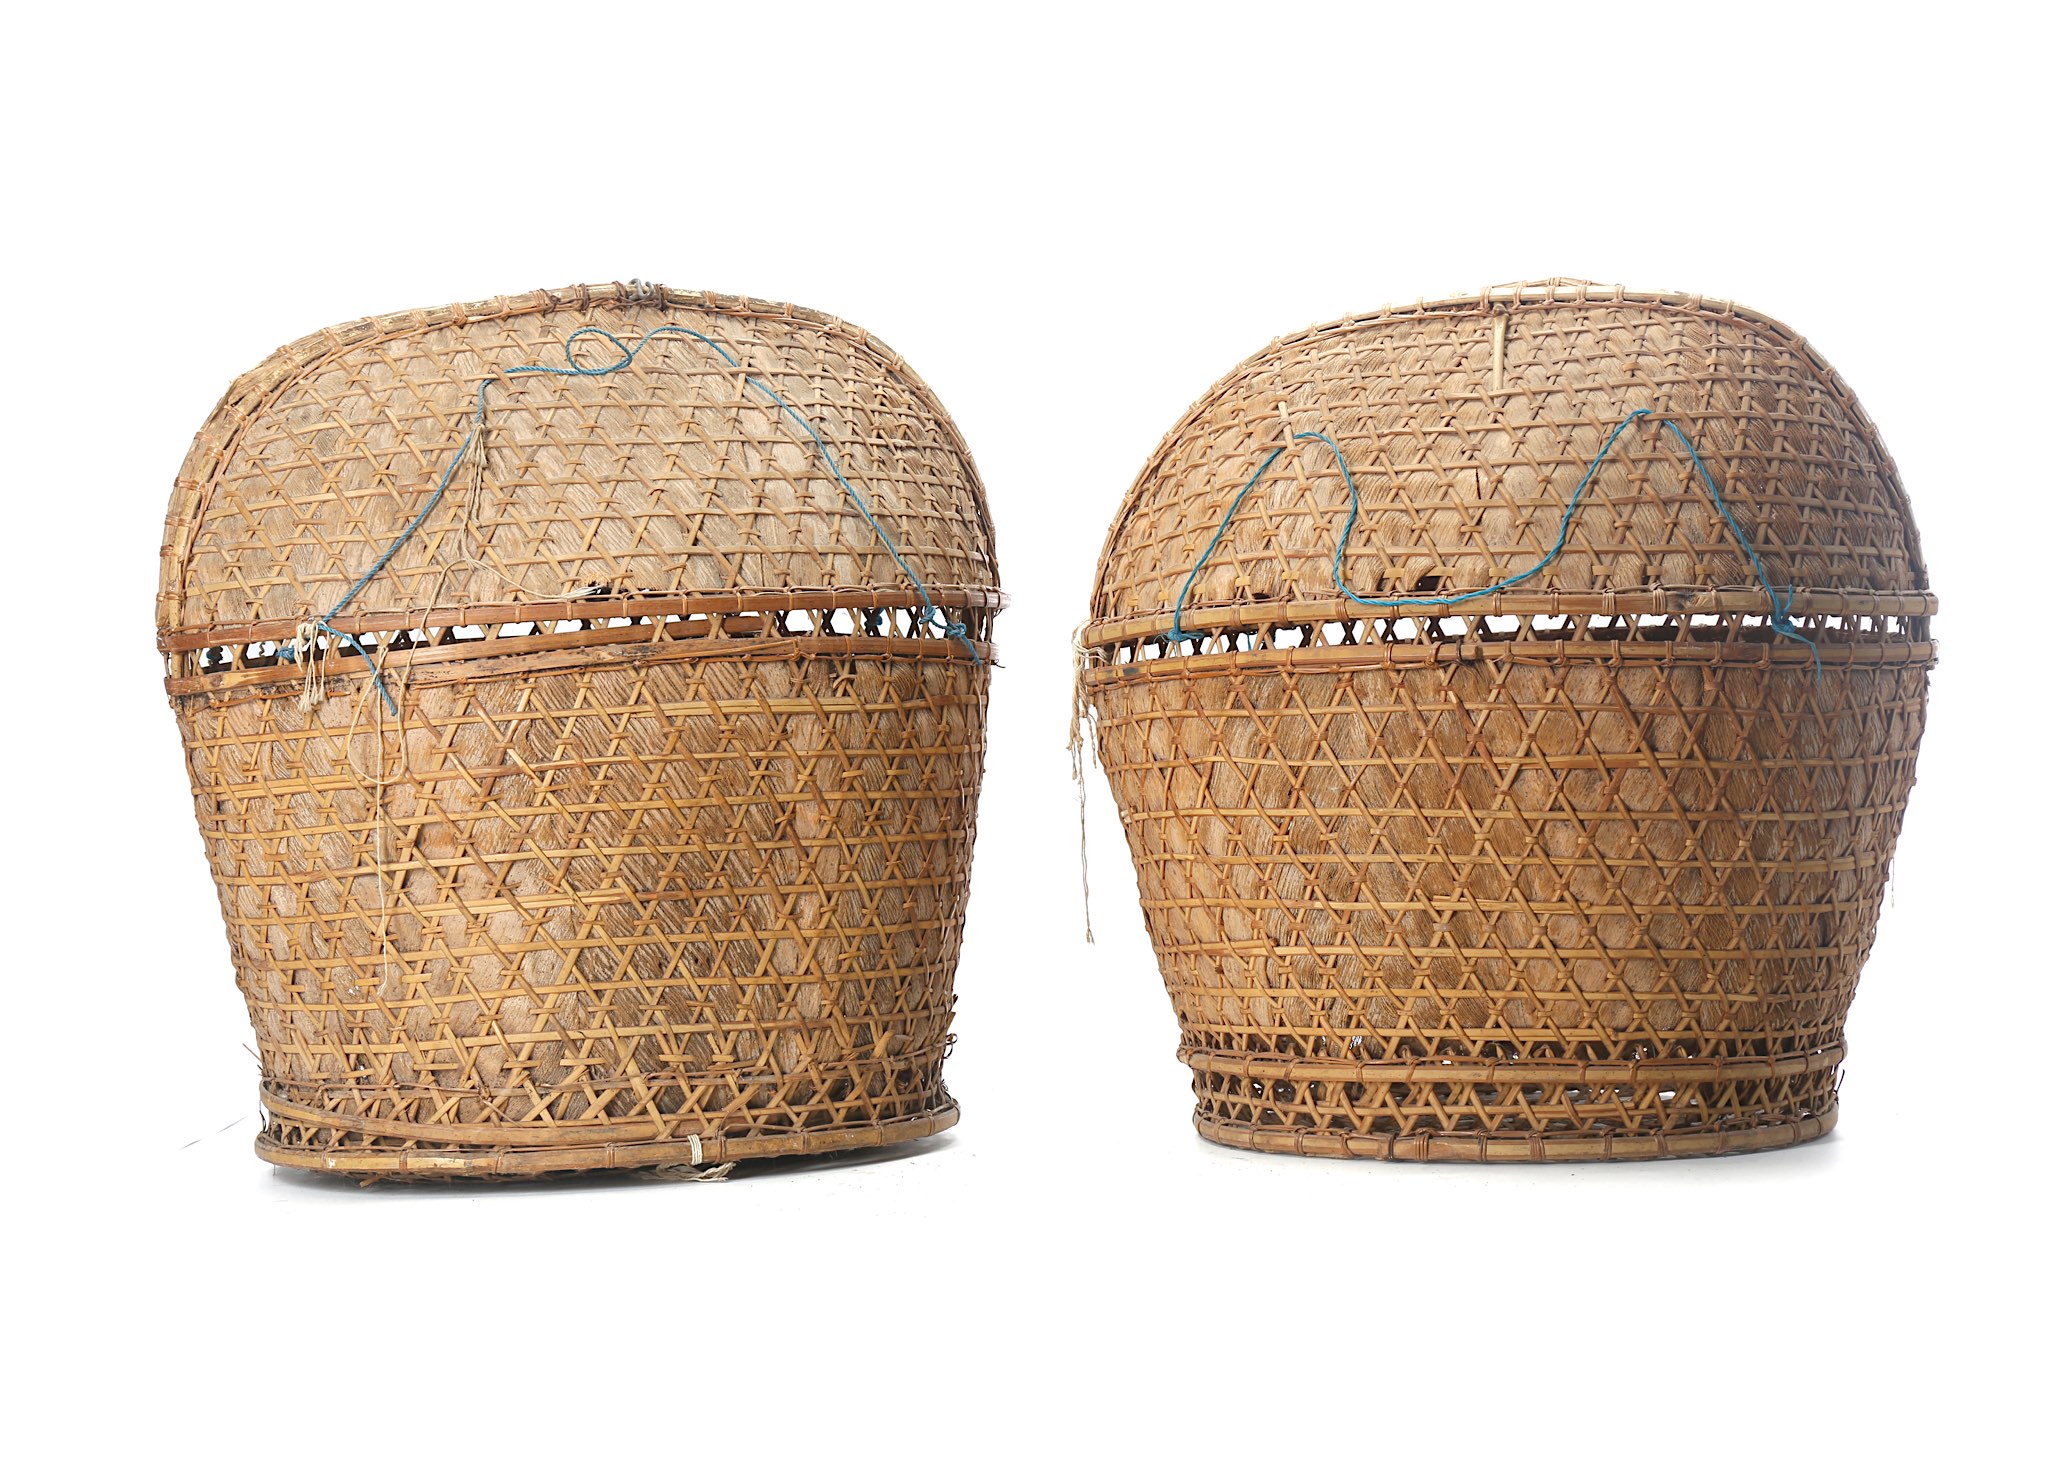 TWO BAMBOO AND RAFFIA LOBSTER BASKETS  Probably from Indonesia, with a flat base the body of the